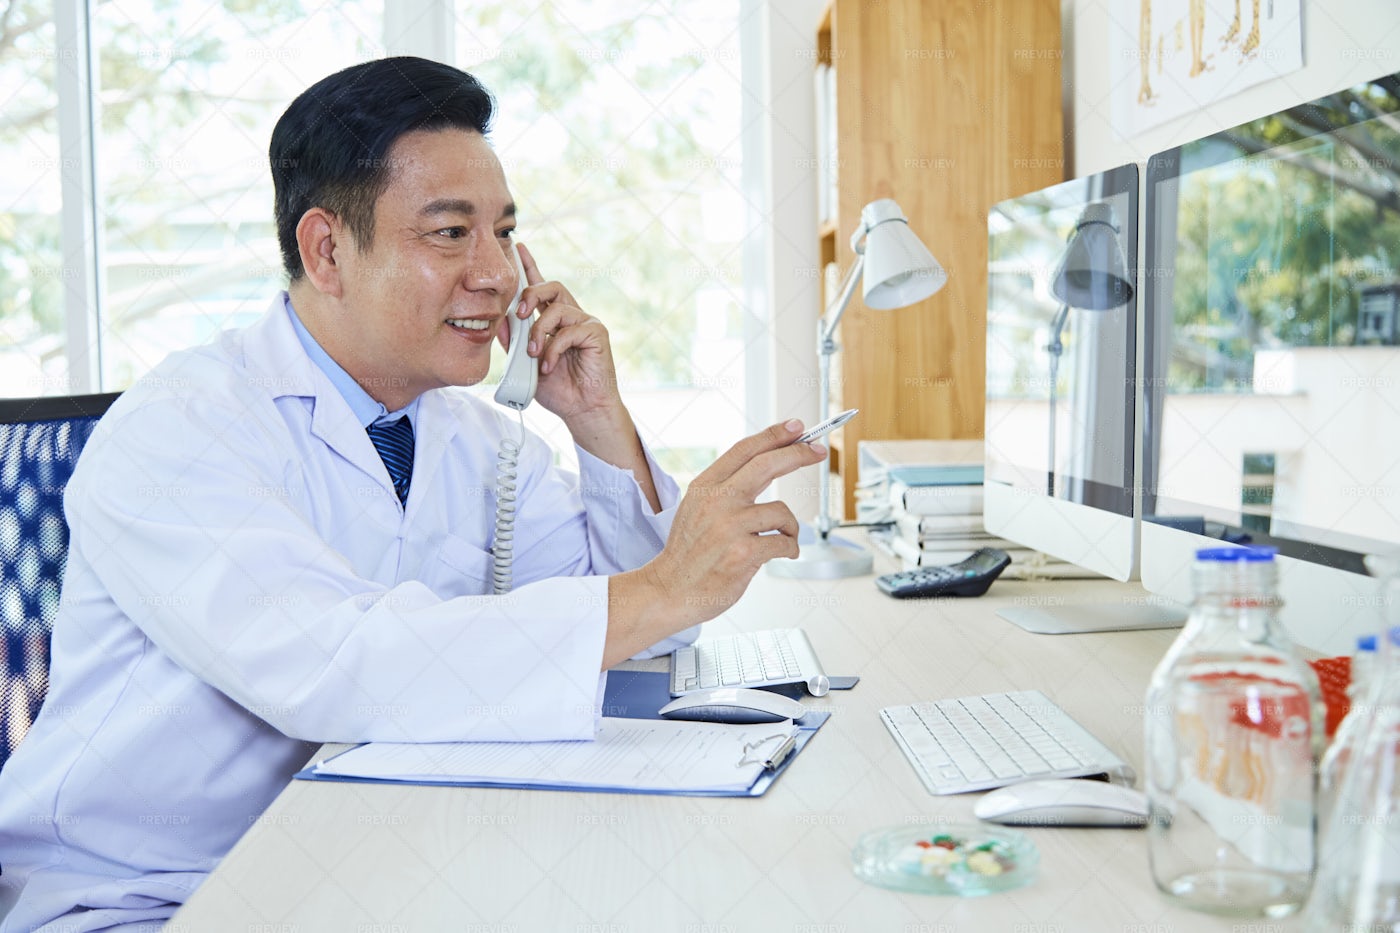 A Doctor On The Phone: Stock Photos